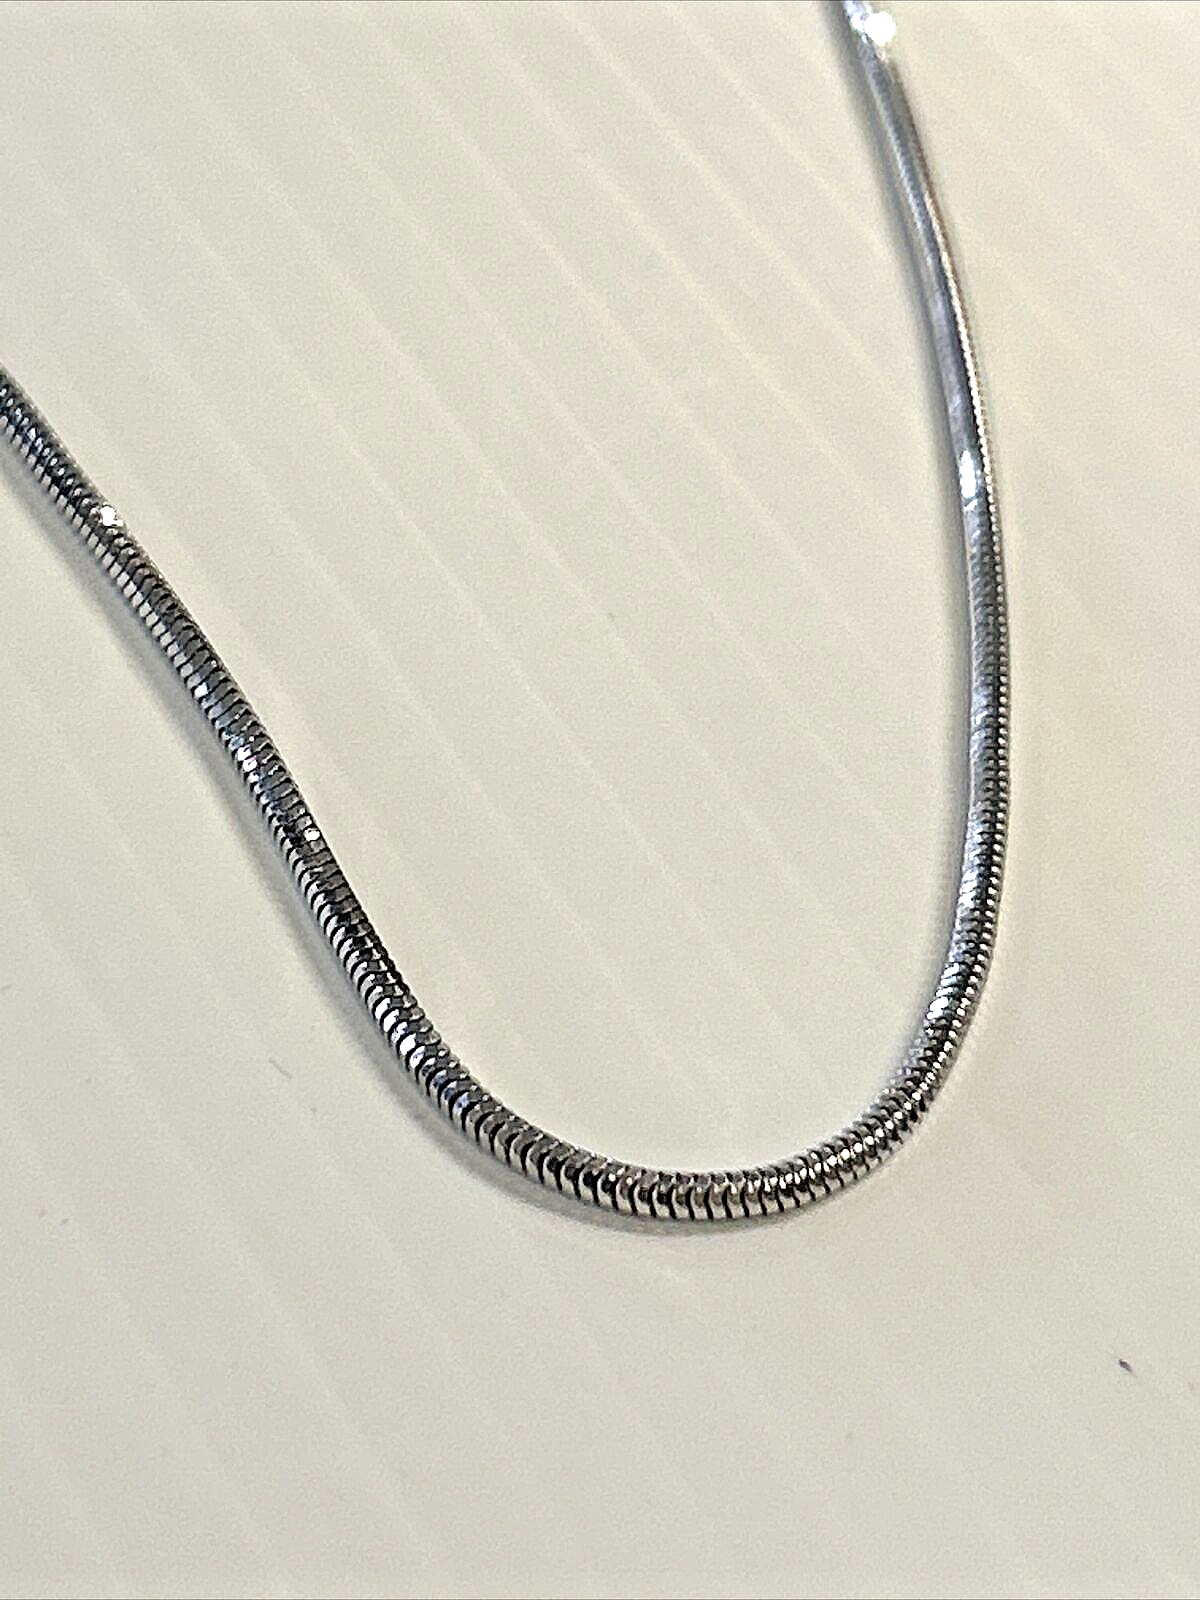 18k 750 Italy White Gold Snake Chain 18 Inches - 9.4 Grams - 1.8mm